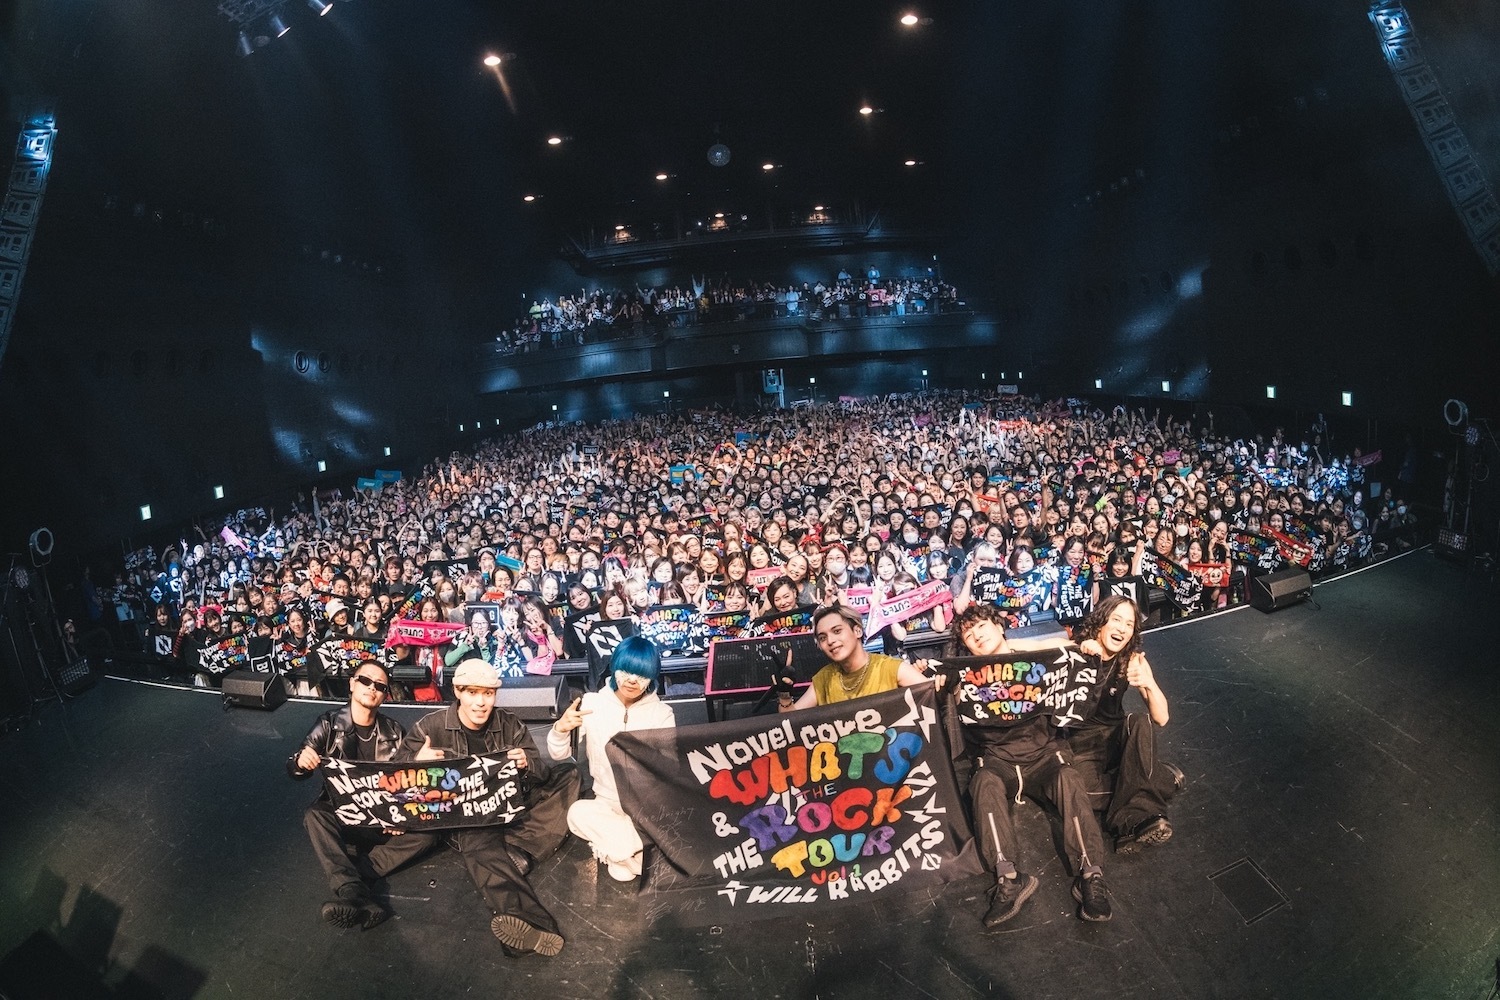 Novel Core『WHAT'S THE ROCK TOUR vol.1』ファイナル東京公演より